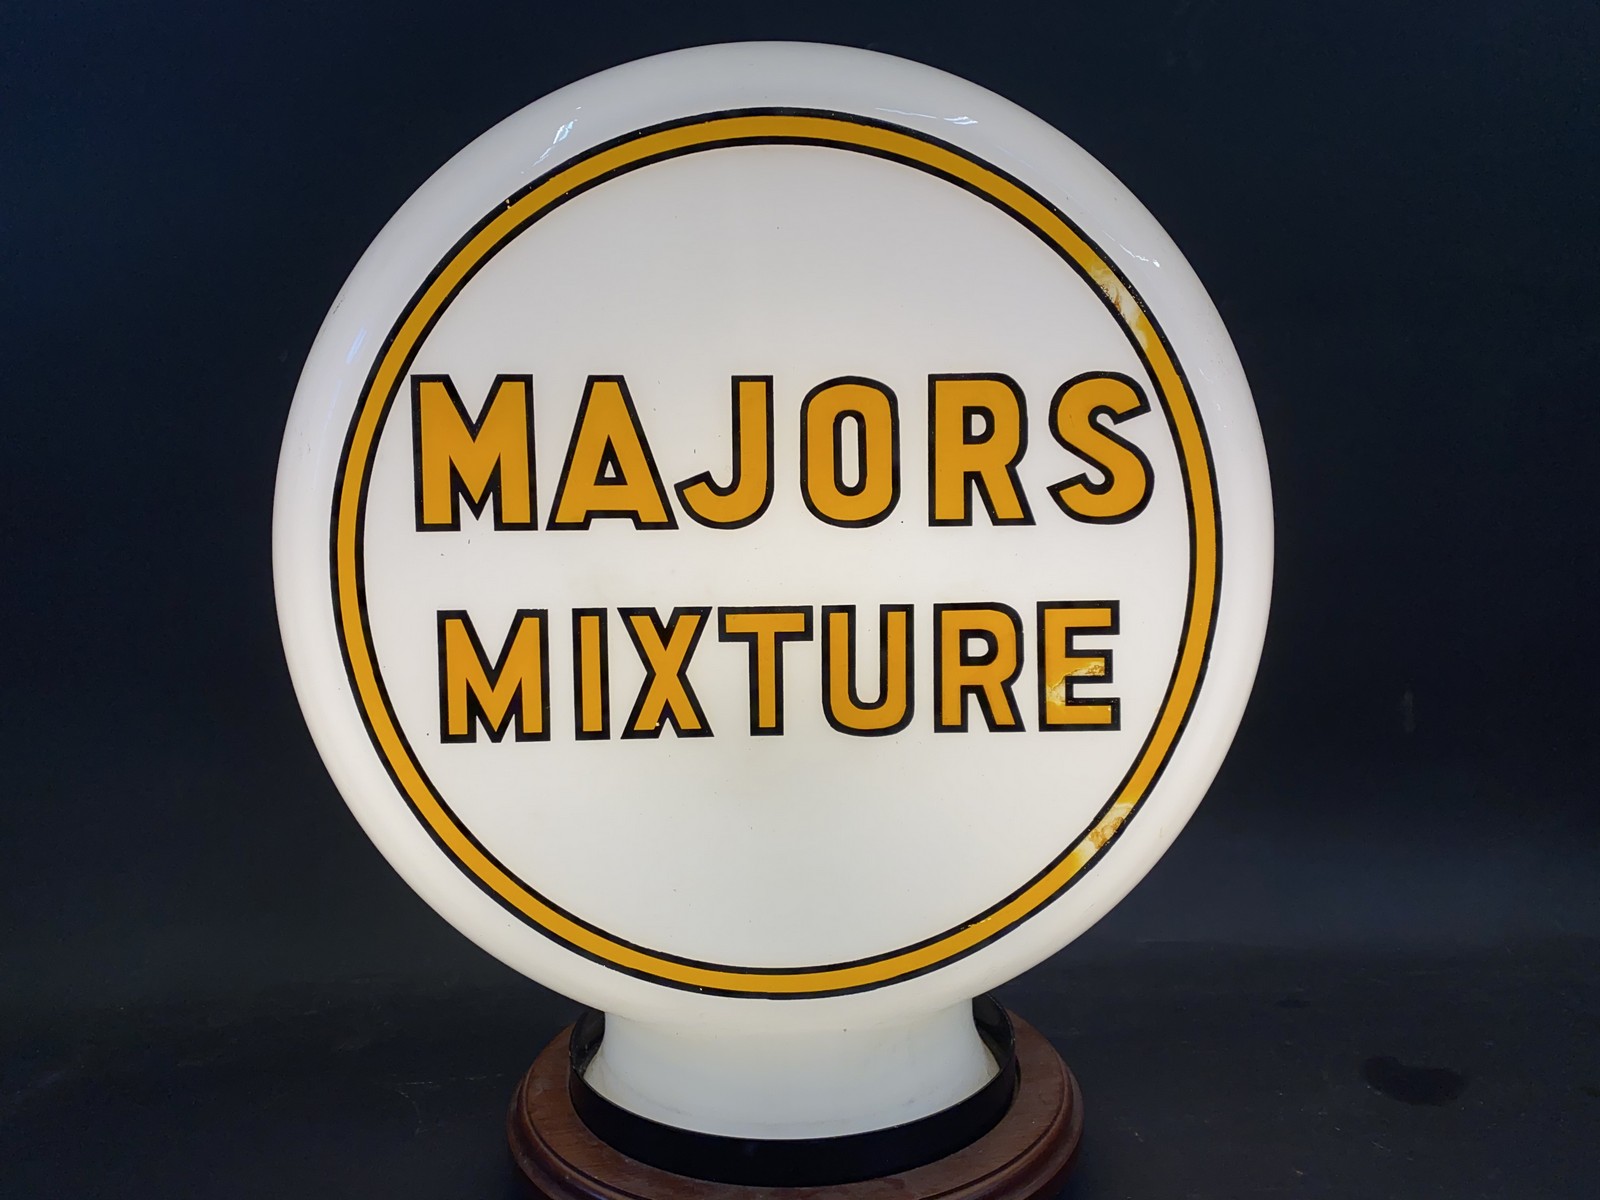 A rarely seen Majors Mixture glass petrol pump globe, in excellent condition, by Hailware. - Image 2 of 3